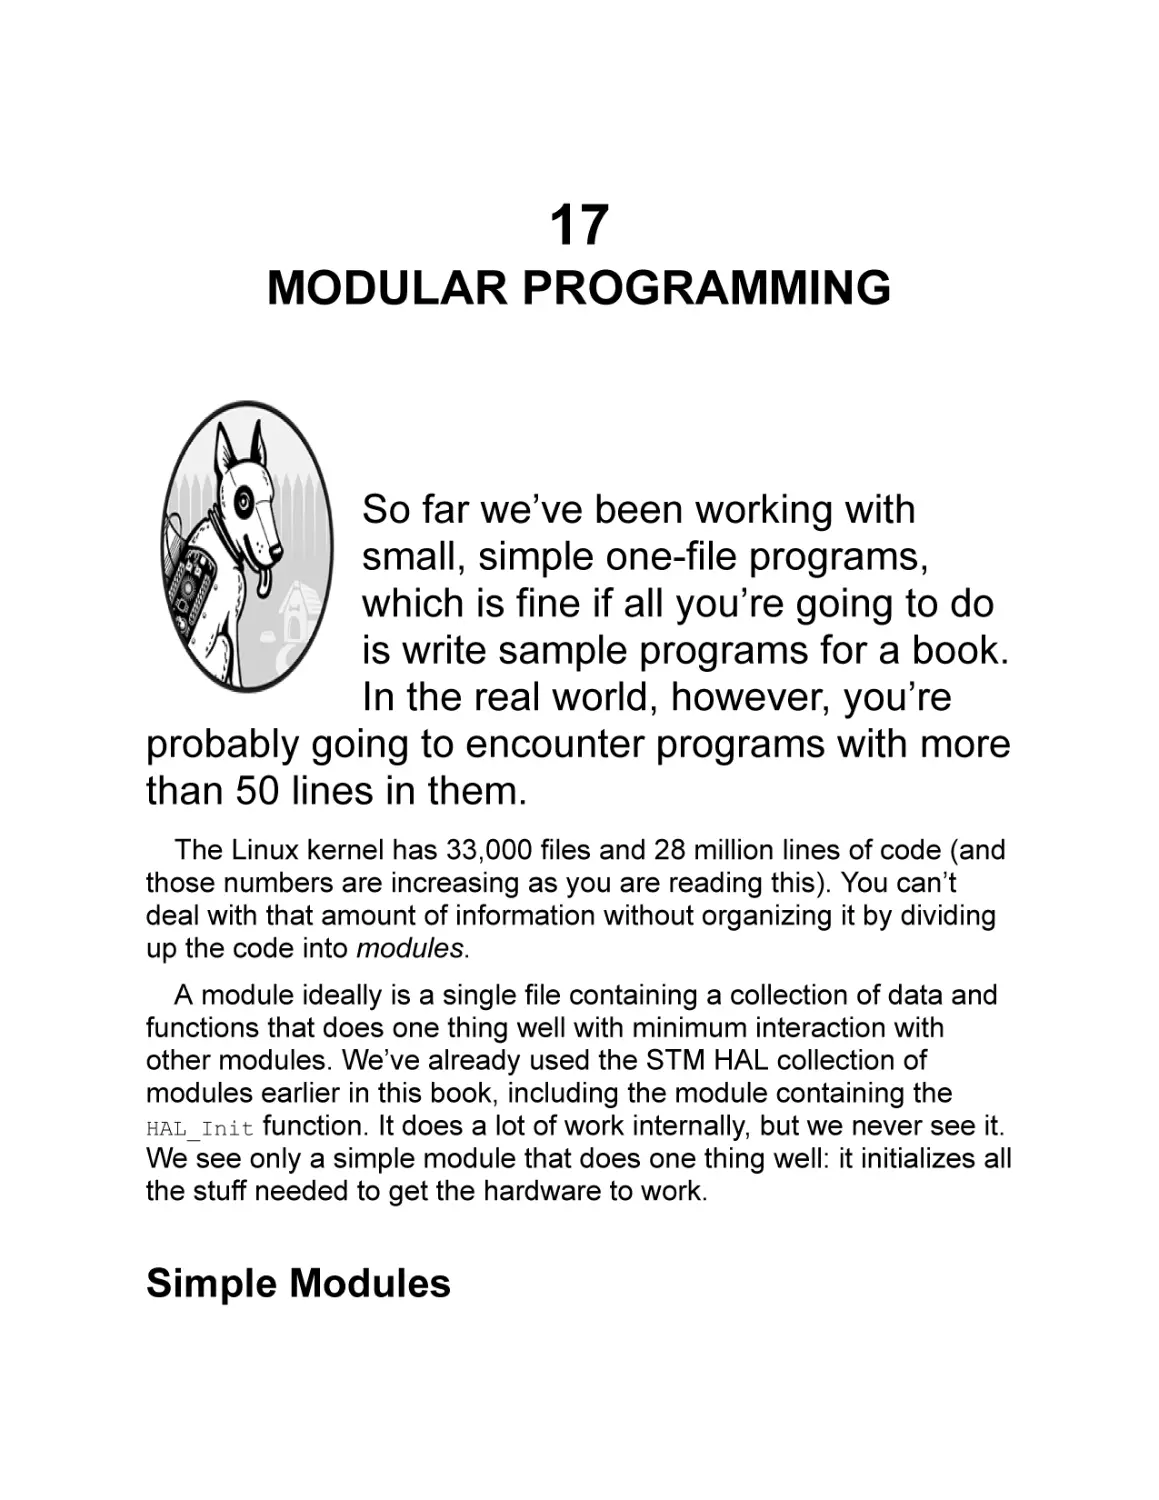 Chapter 17
Simple Modules